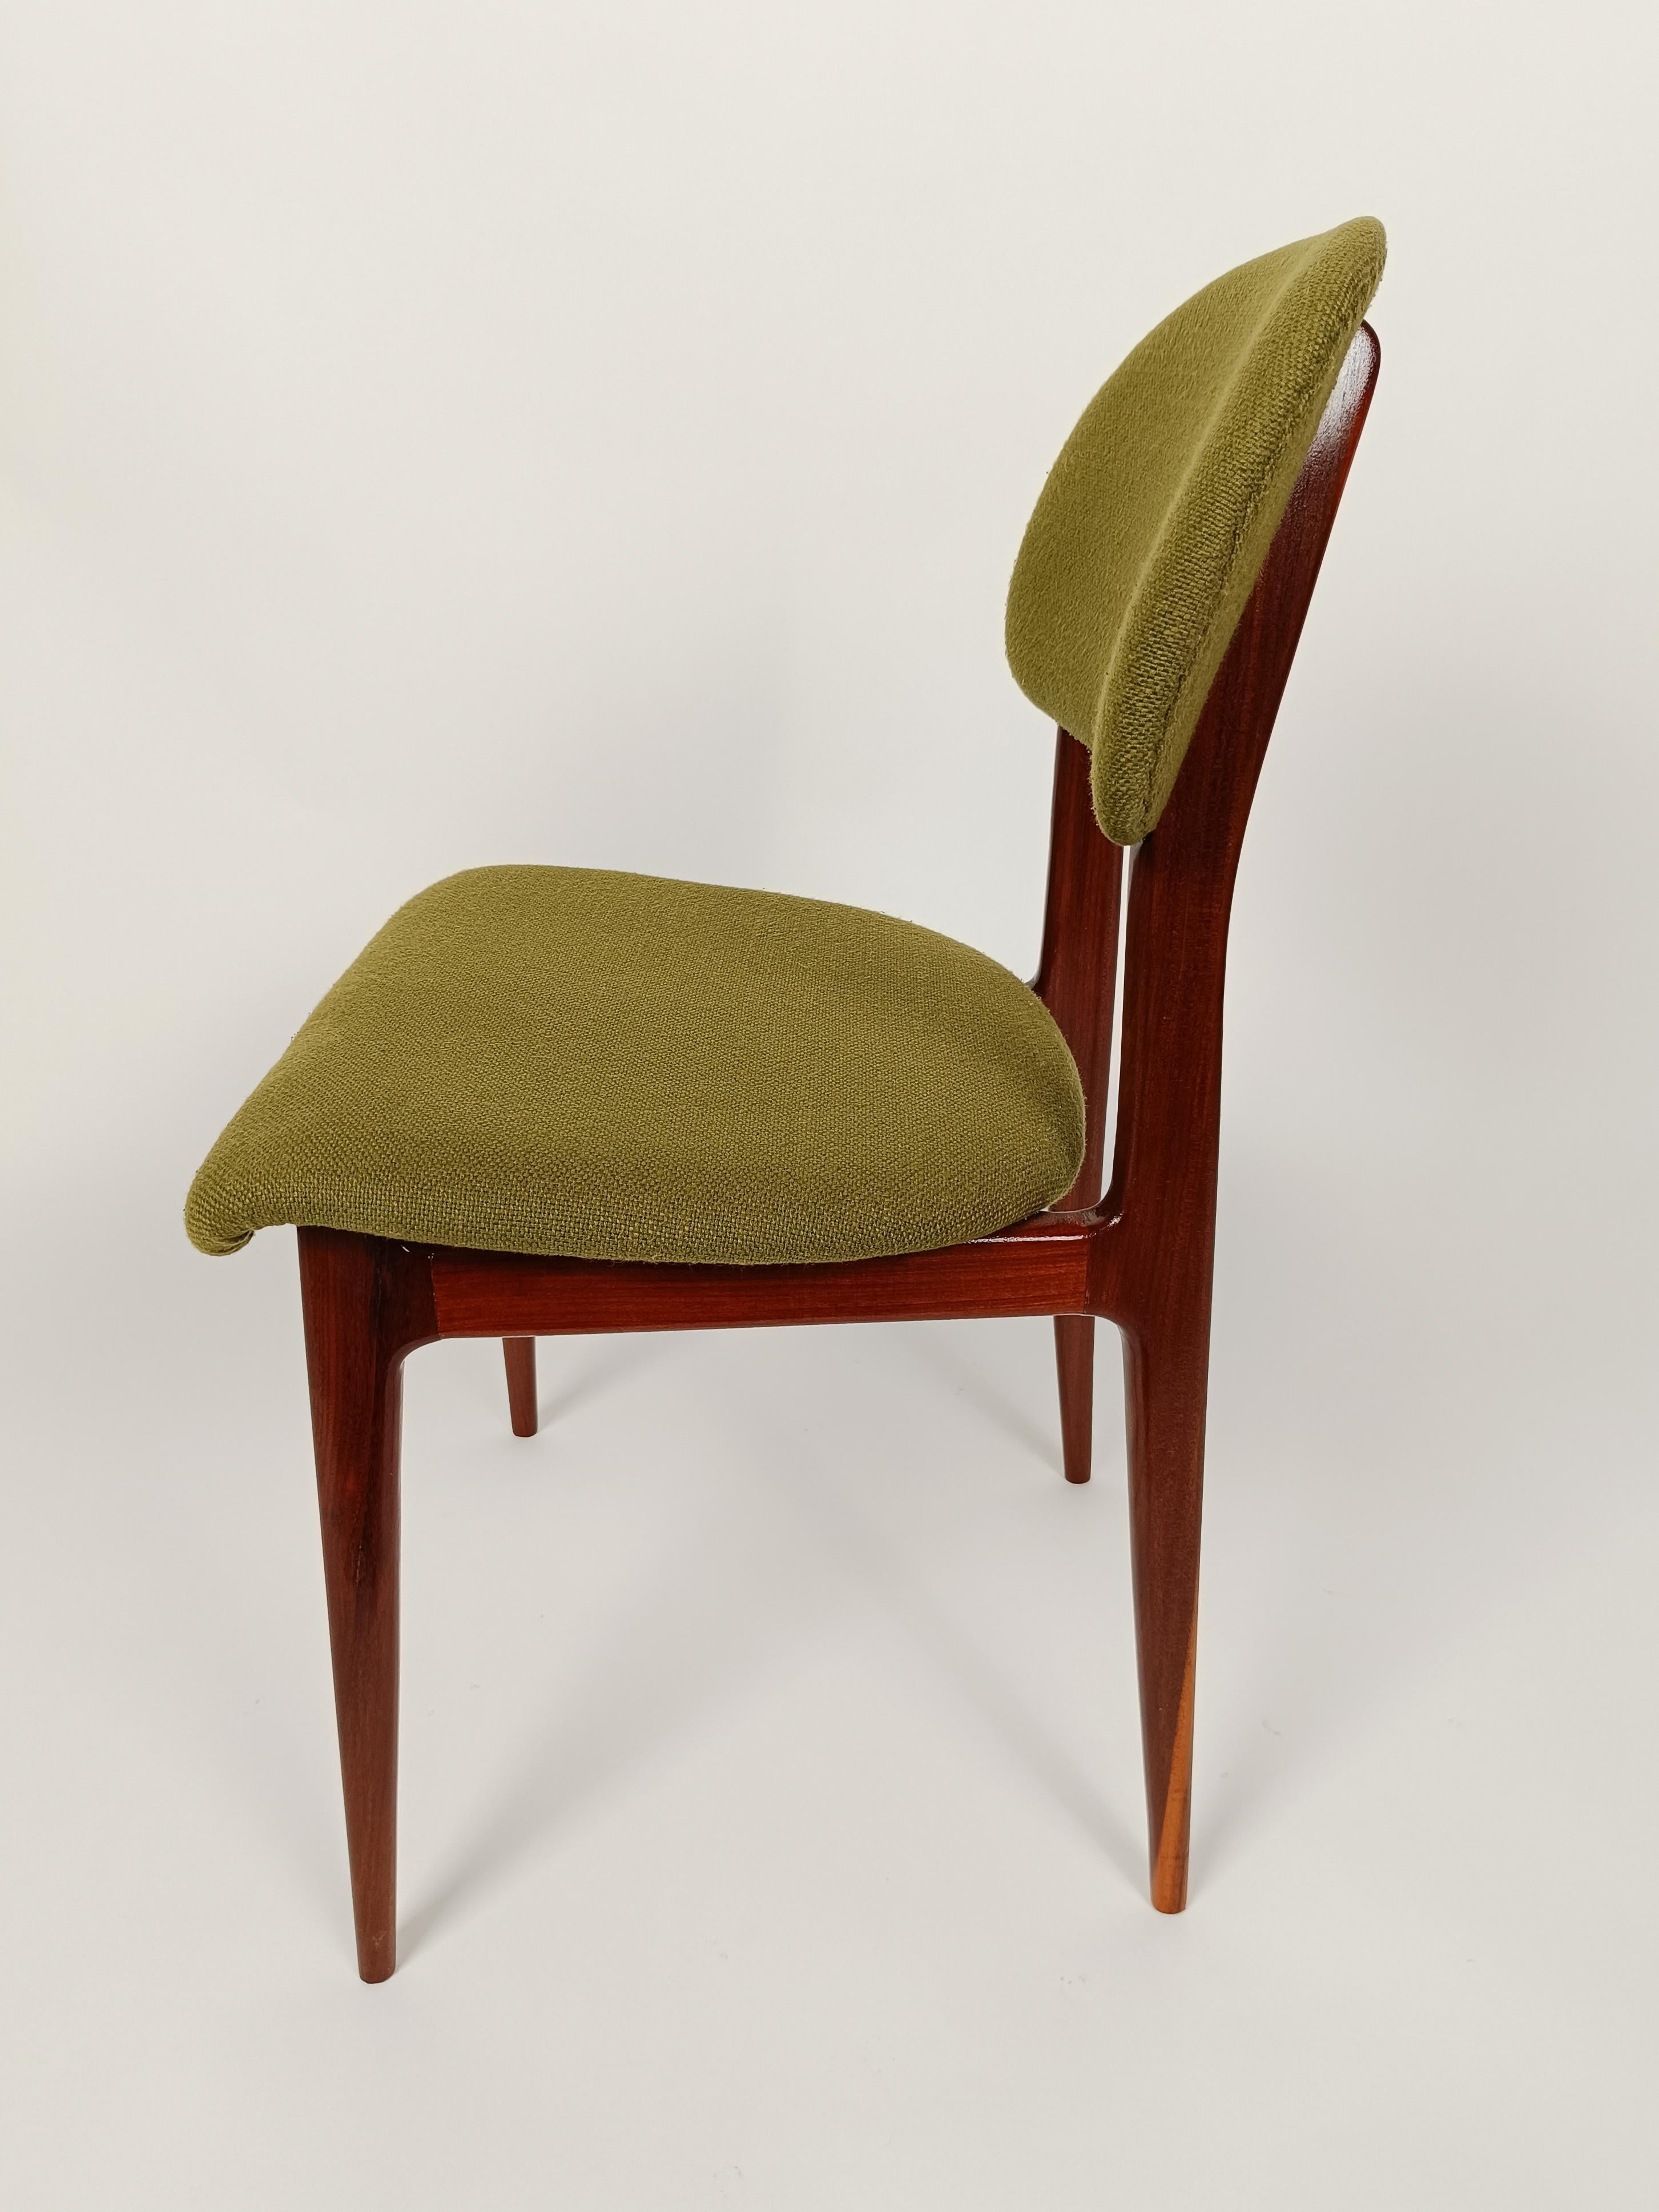 Italian Midcentury Chairs Attributed to Carlo Hauner and Martin Eisler, 1960s For Sale 3